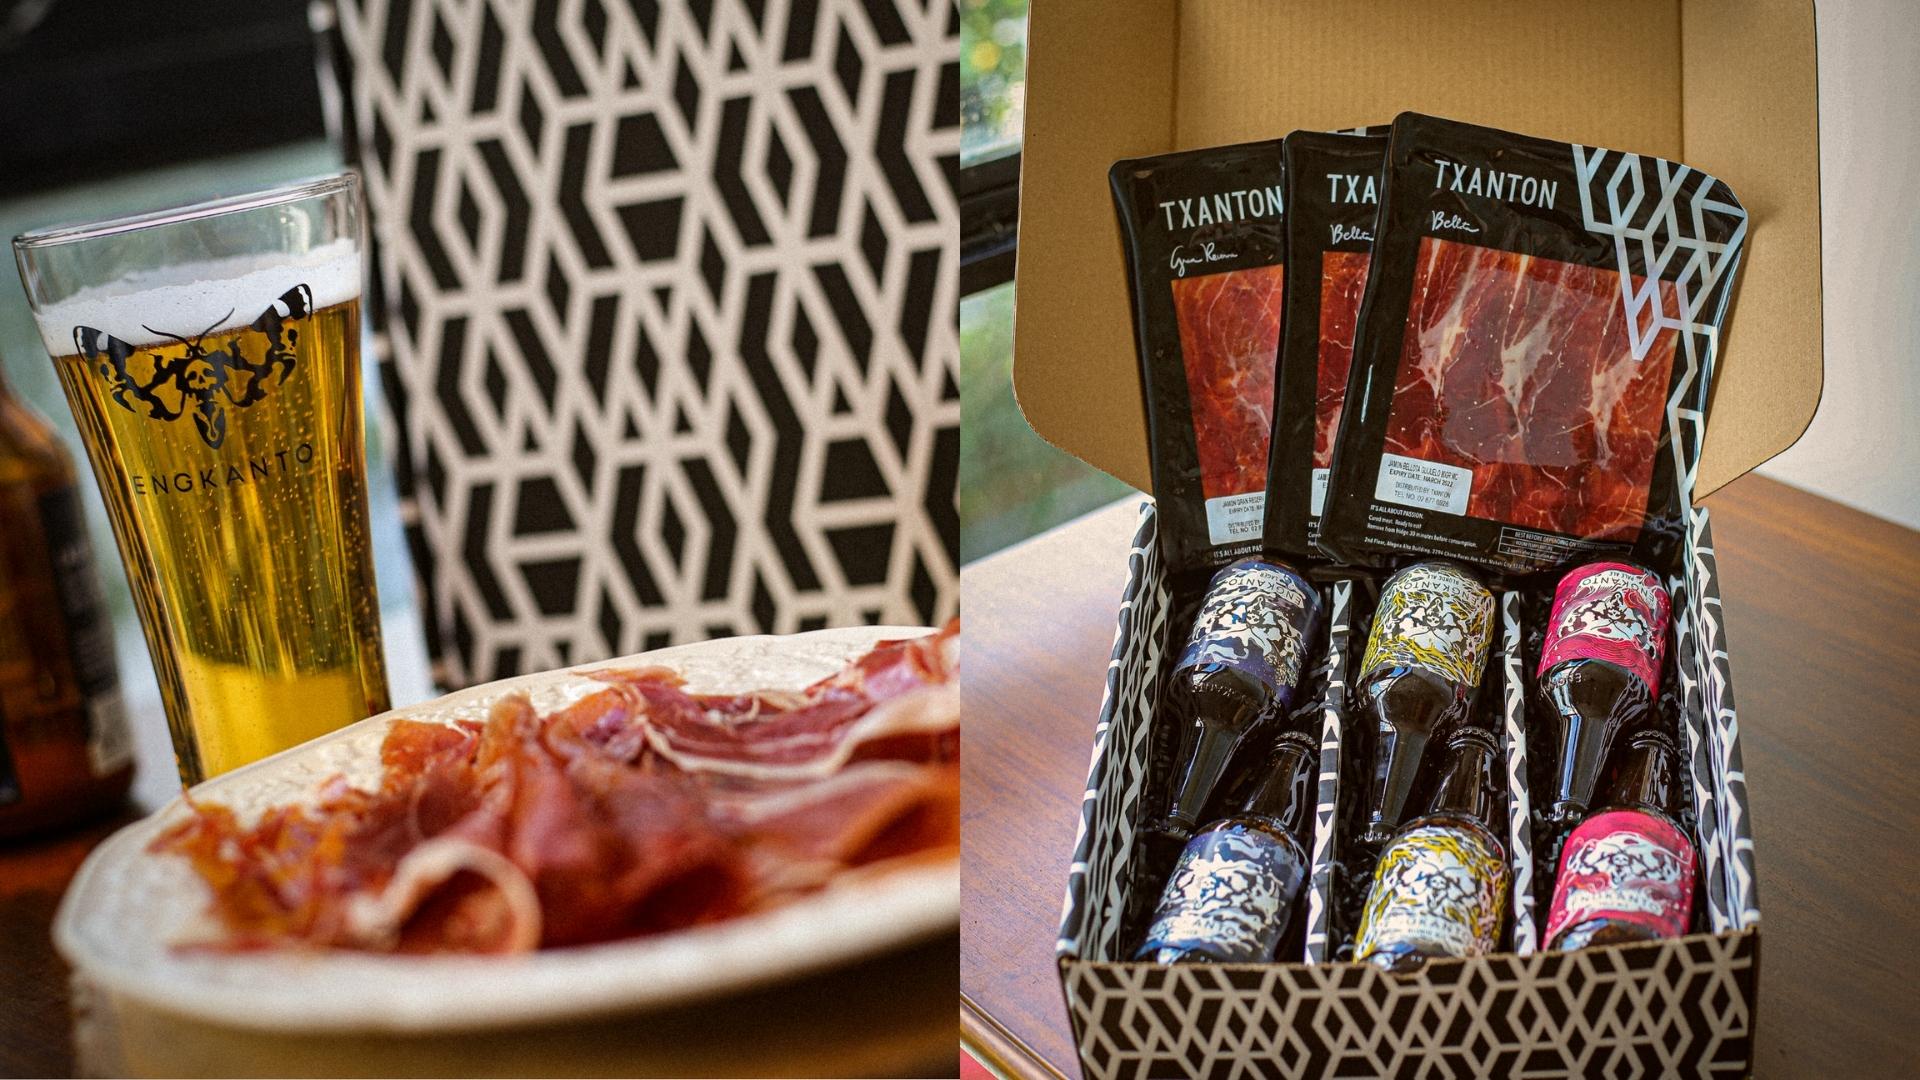 Jamón and Craft Beer: An Artisanal Pair You Didn’t See Coming